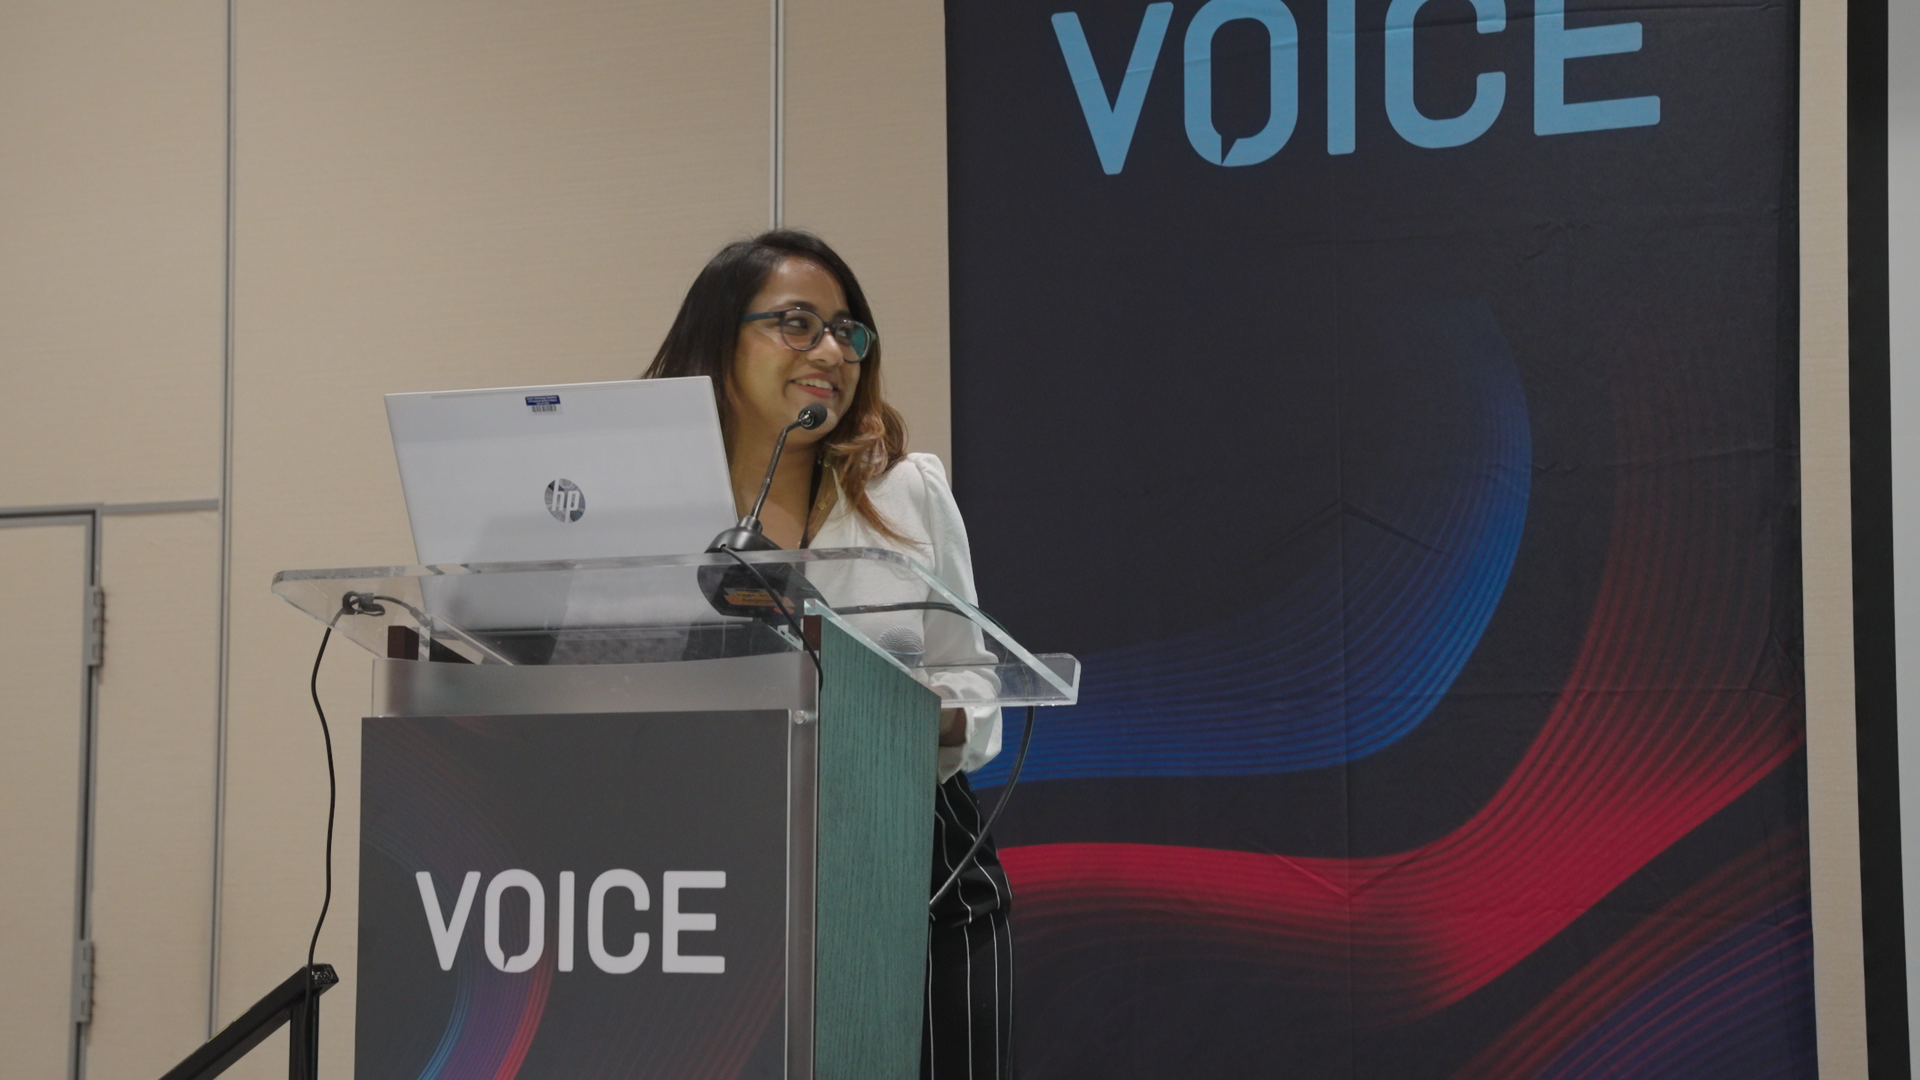 VOICE22 | Writing Creative Content for Voice | Shruti Swaminathan